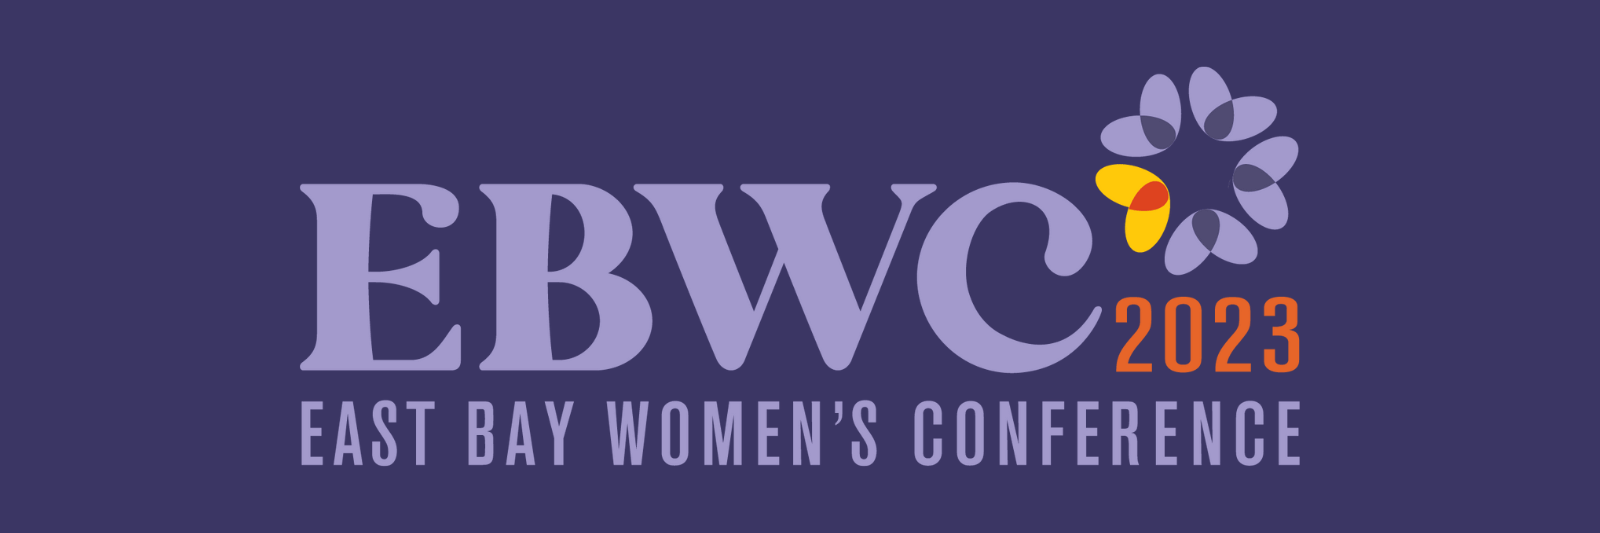 EBWC 2023, East Bay Women's Conference